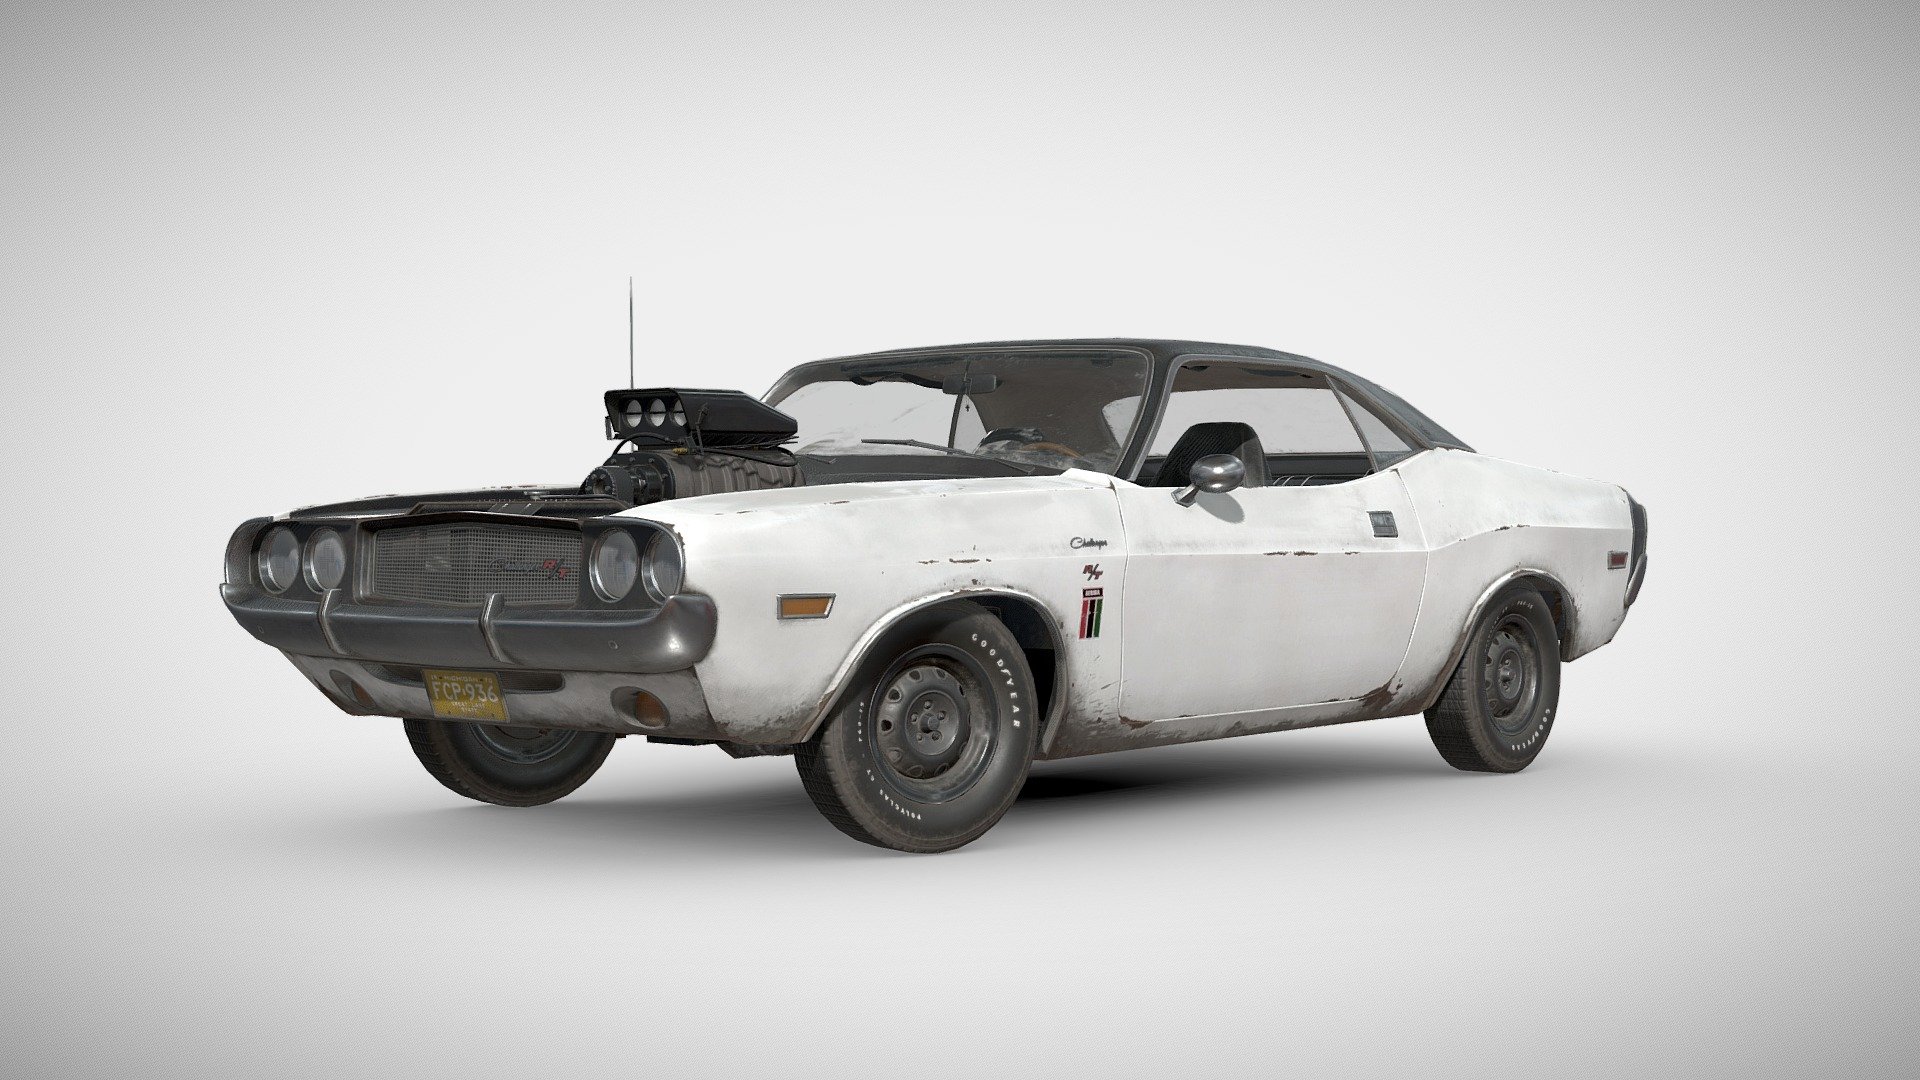 I rebuilt Black Ghost - a real historic car, but made it supercharged and coloured it white.

I tried to reach the same quality as seen in PUBG models made by Karol Miklas

Modelled in Blender, baked in Marmoset Toolbag, textured in Substance Painter, rendered in Sketchfab

Link to portfolio: https://www.artstation.com/briyataren - White Ghost - 3D model by grafdooku56 (@AlekseyKuchepatov) 3d model